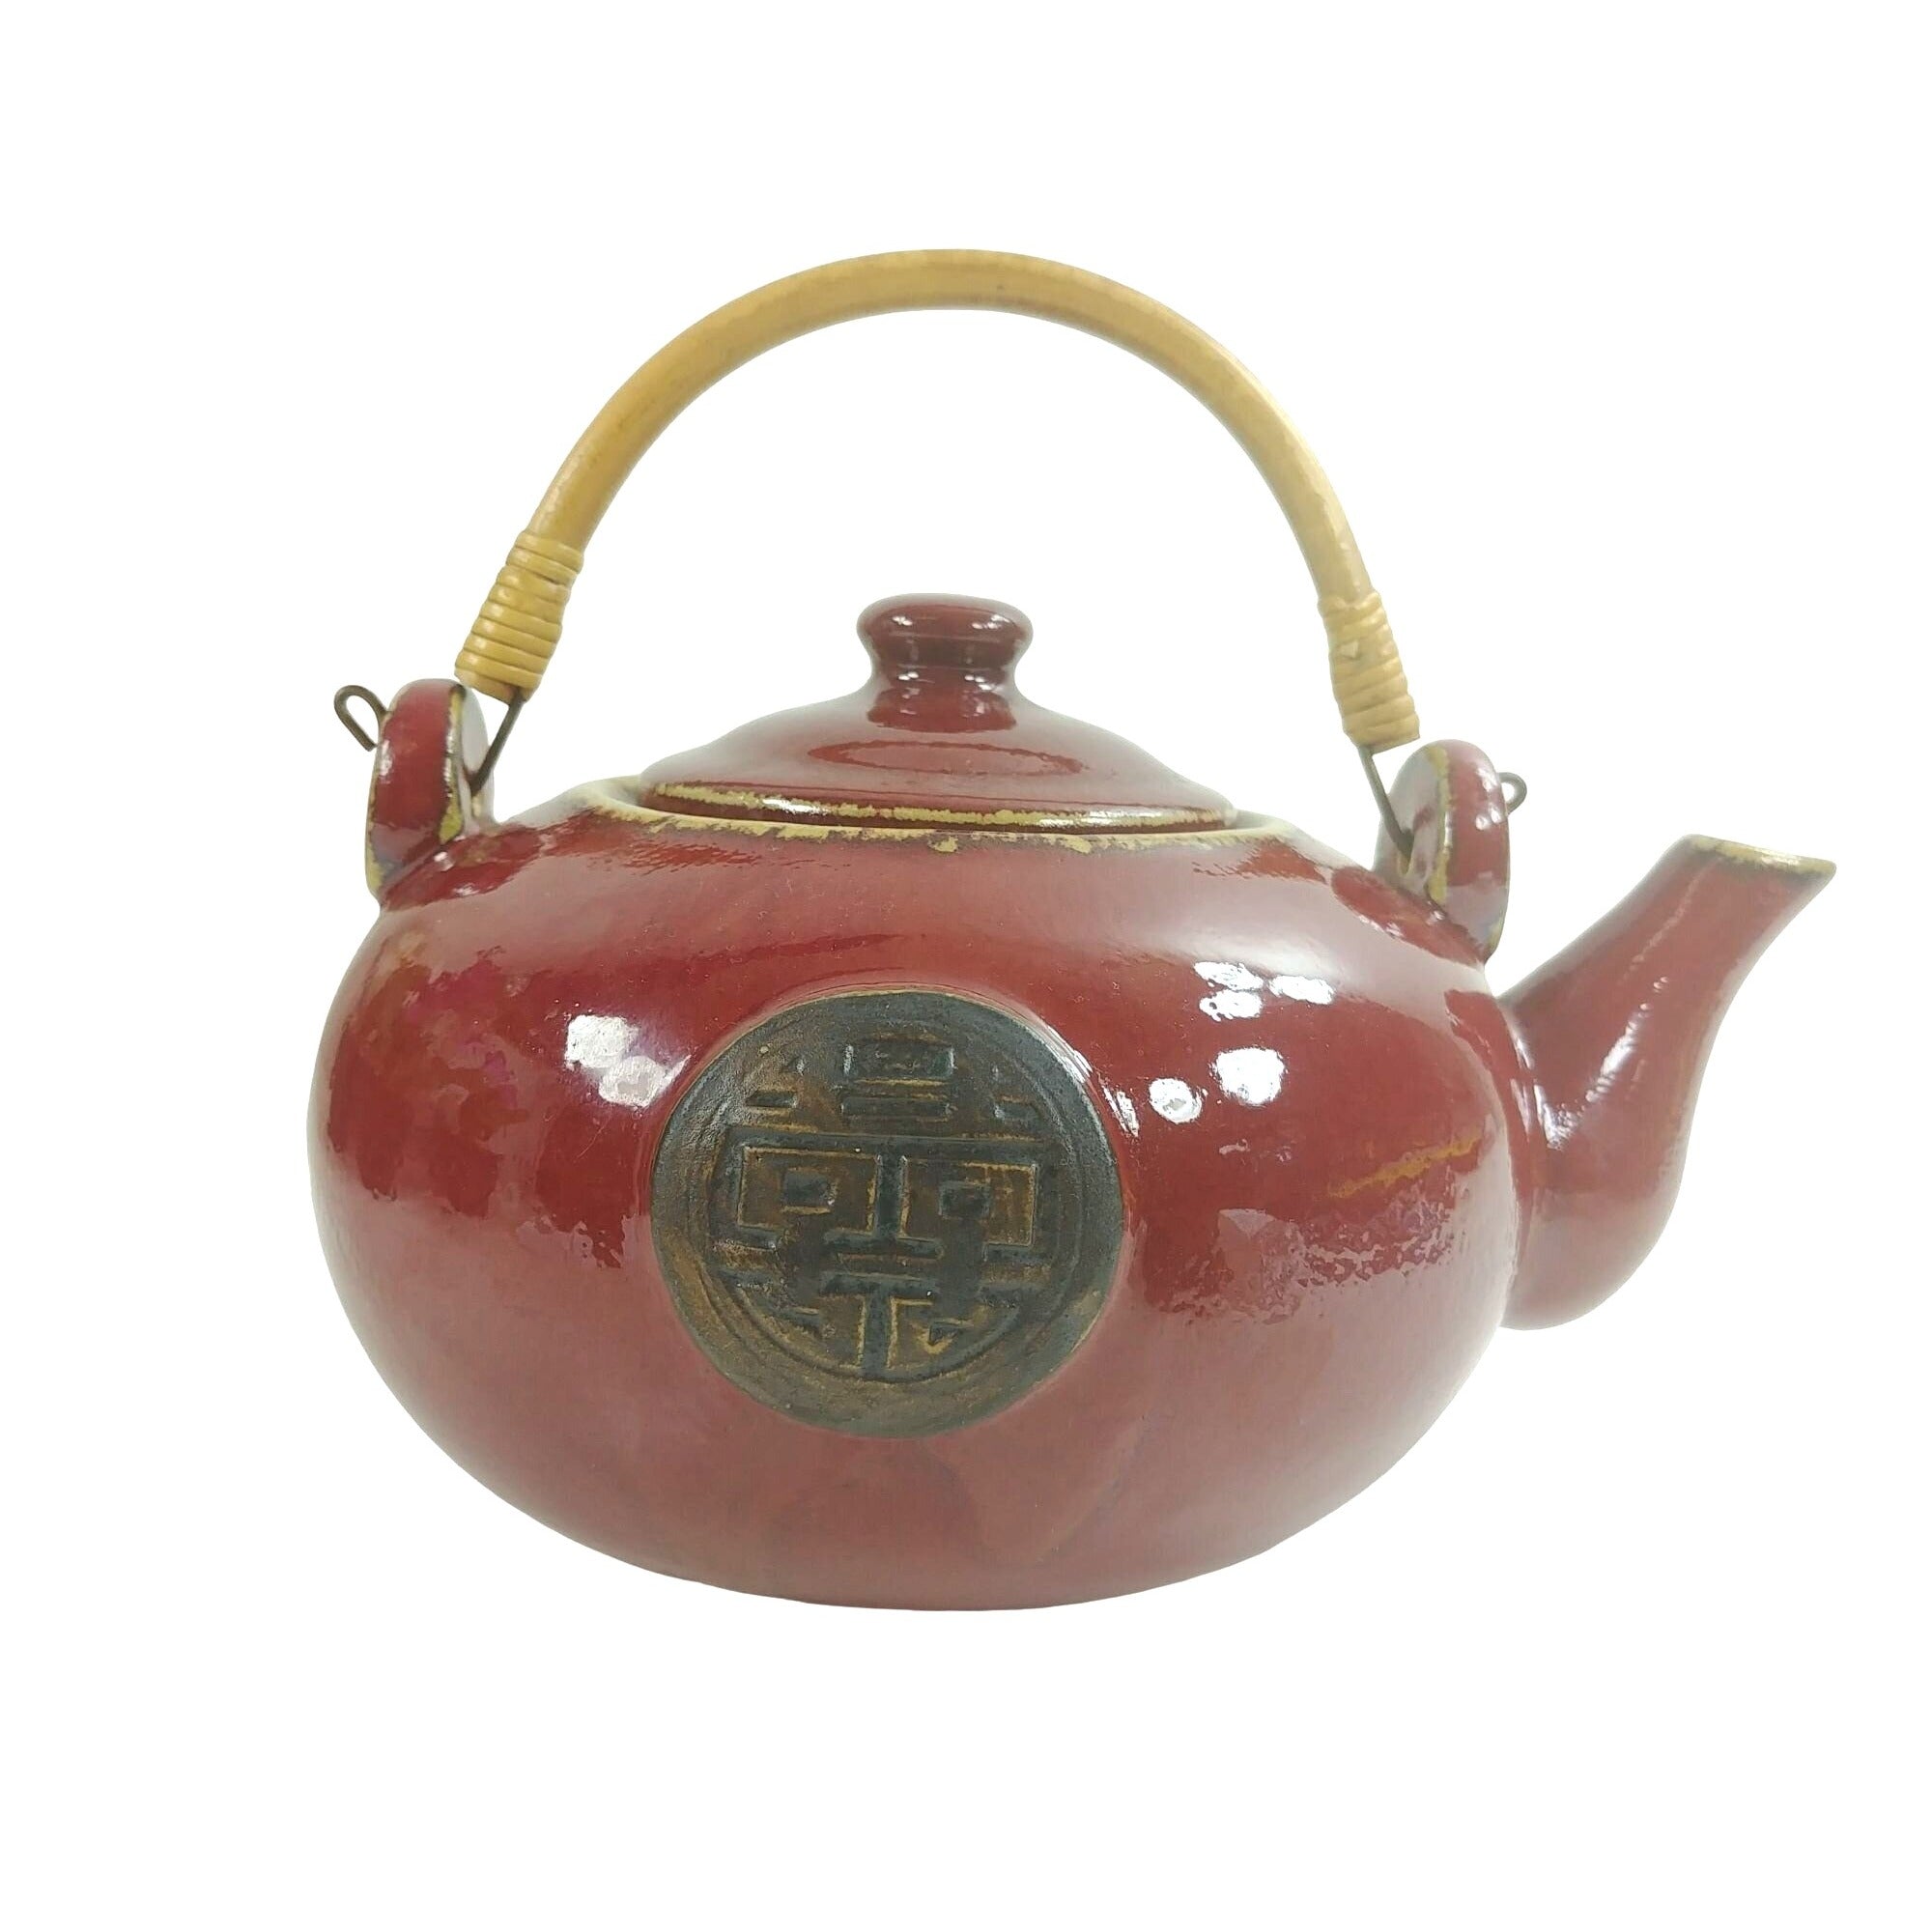 Teapot Decorative Asian Ceramic Lid Wicker Wrapped Handle 5 Cups